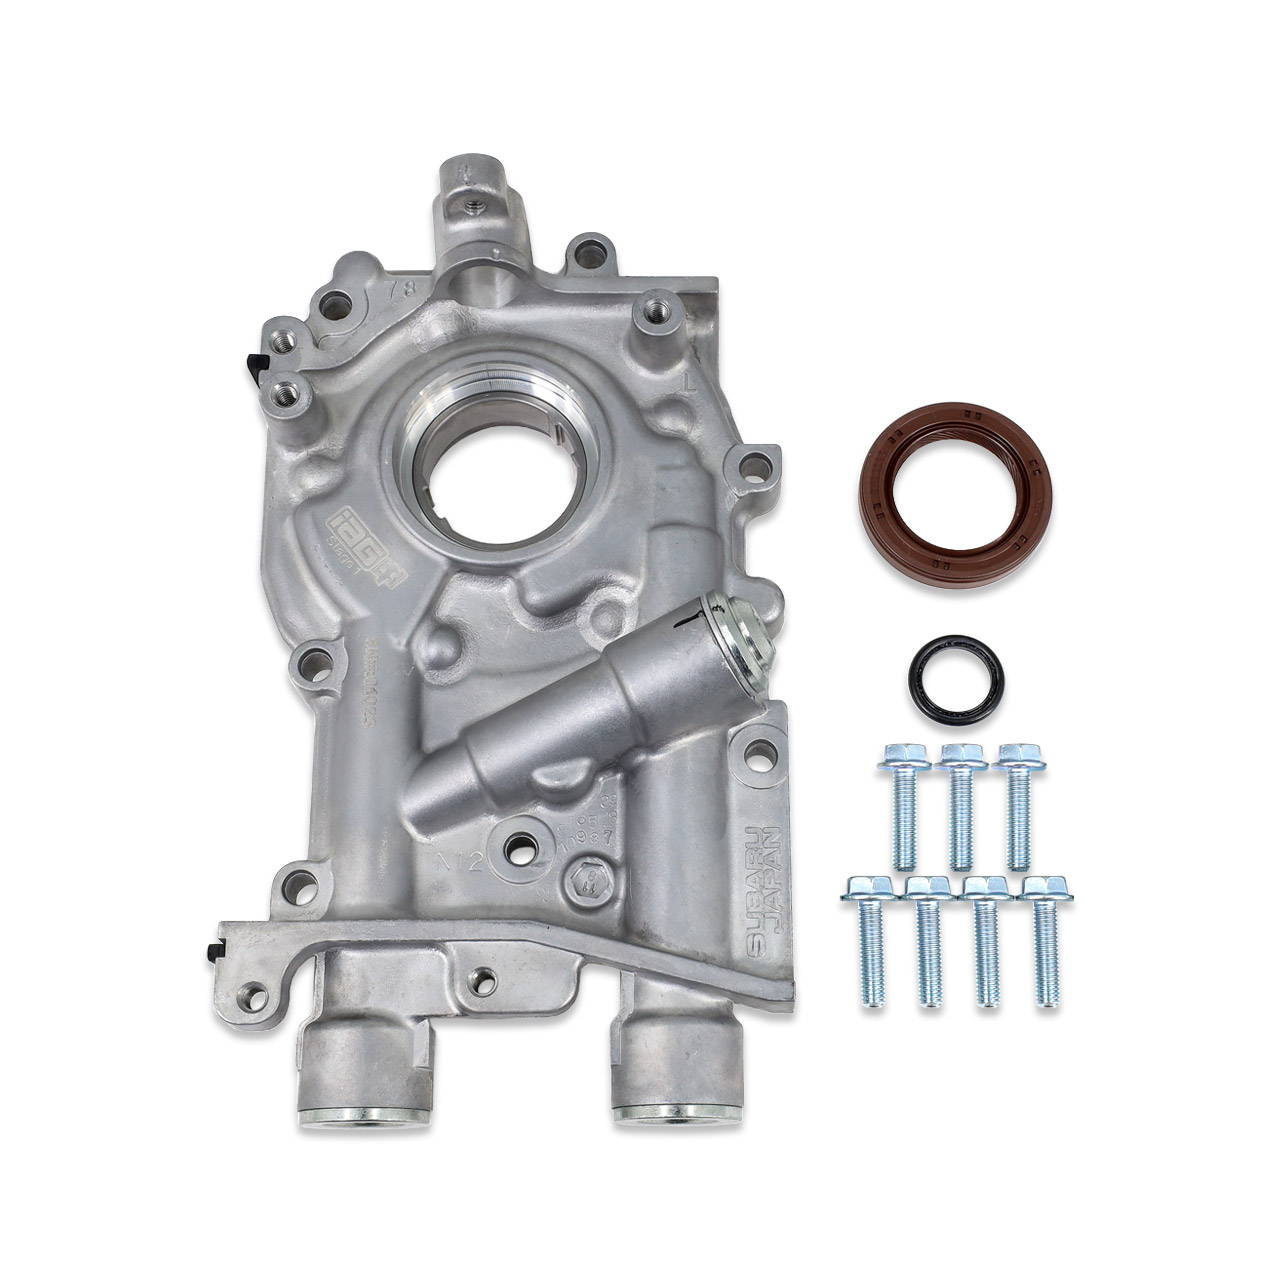 IAG Stage 1 or Stage 2 Oil Pumps